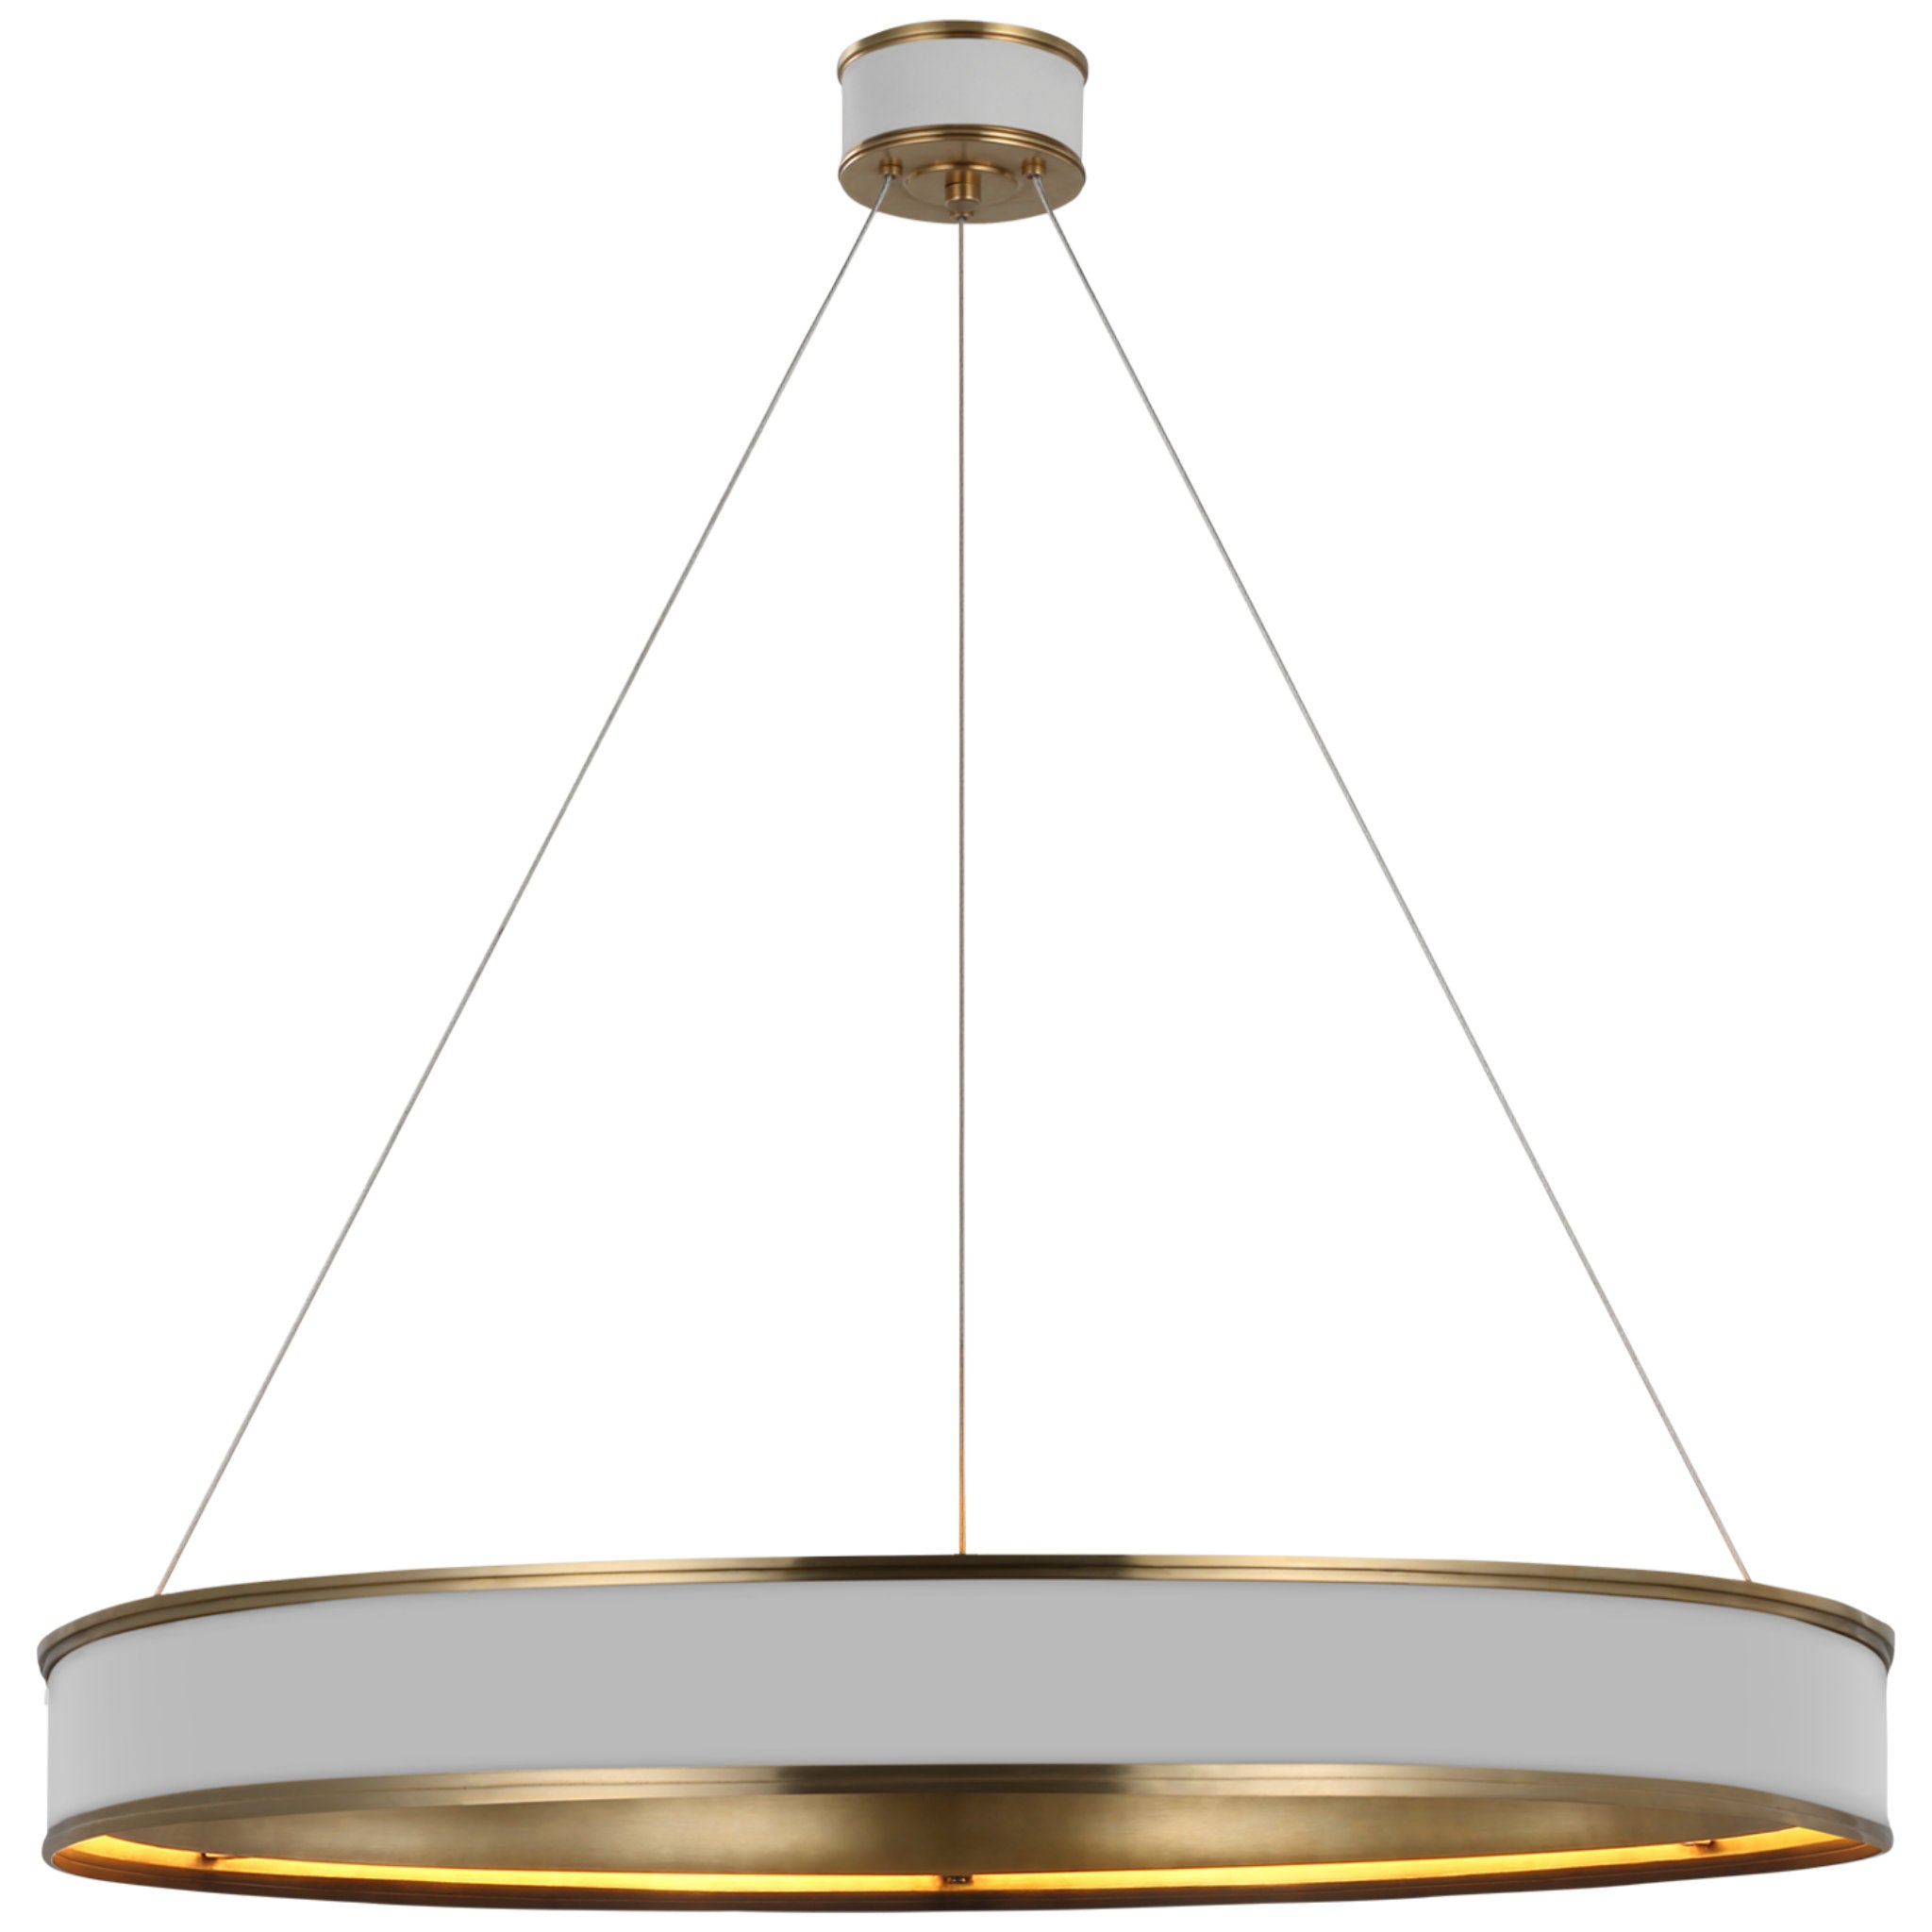 Chapman & Myers Connery 40" Ring Chandelier in Matte White and Antique-Burnished Brass